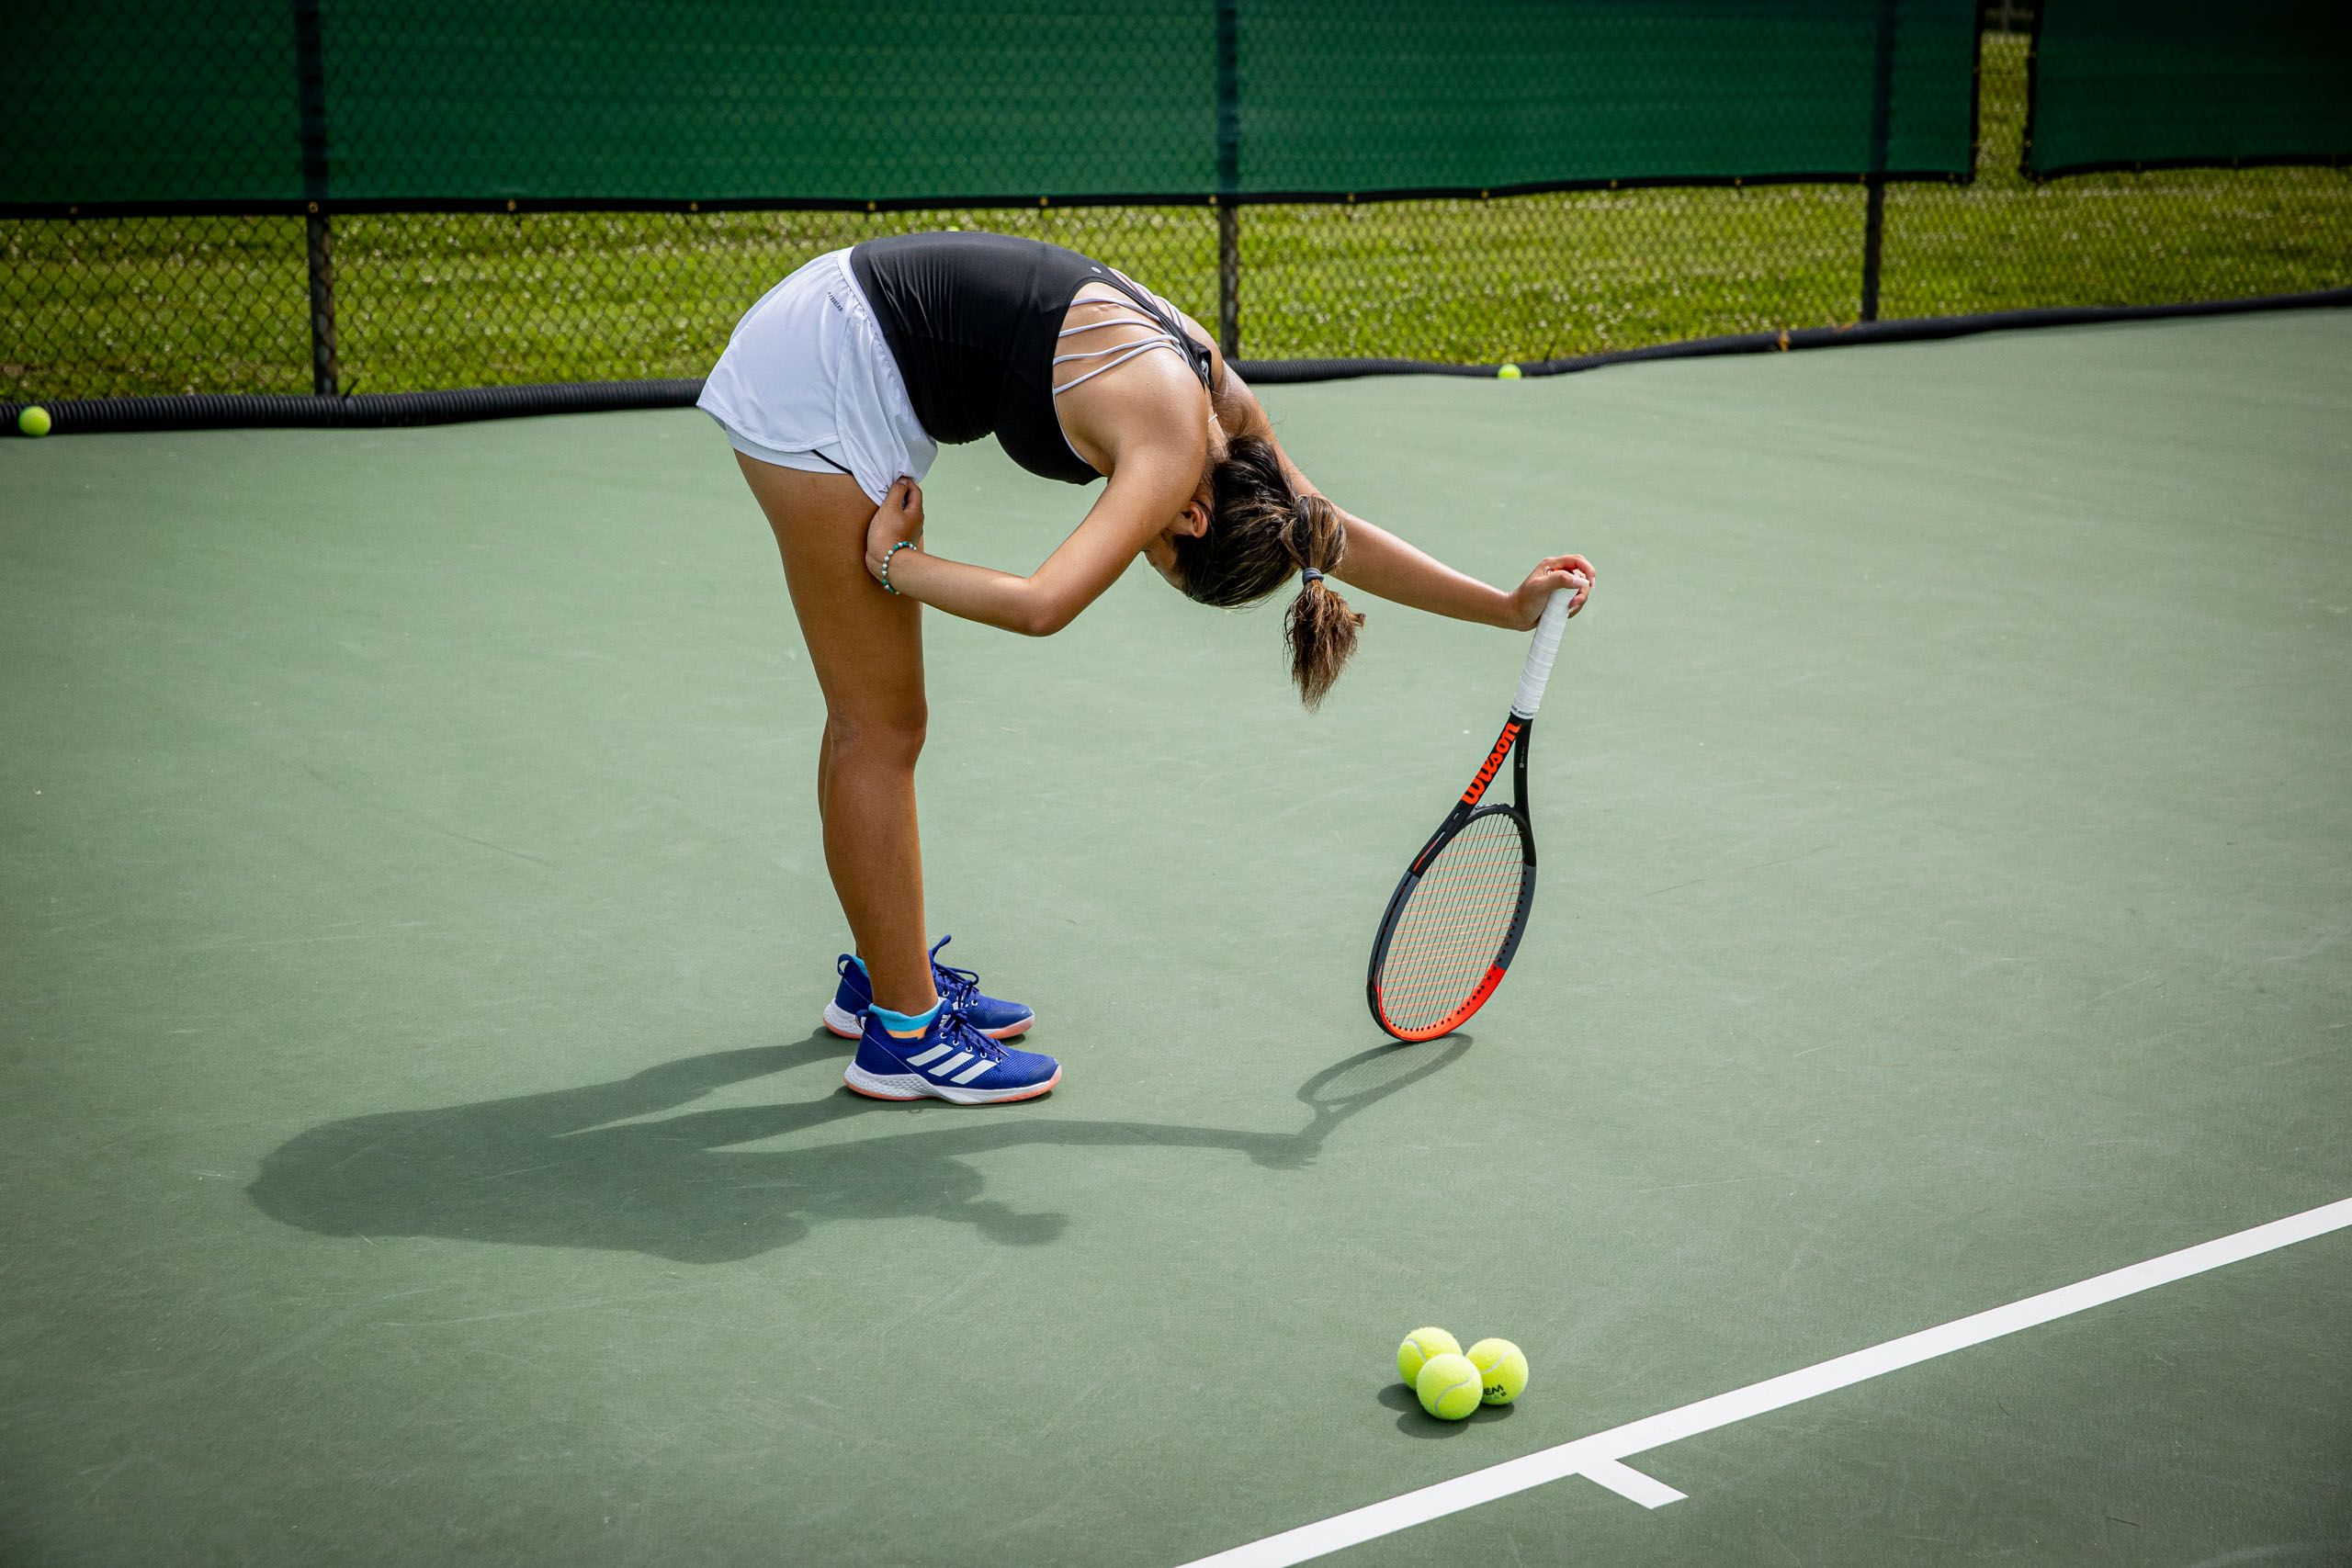 Girl Stretching Before Tennis